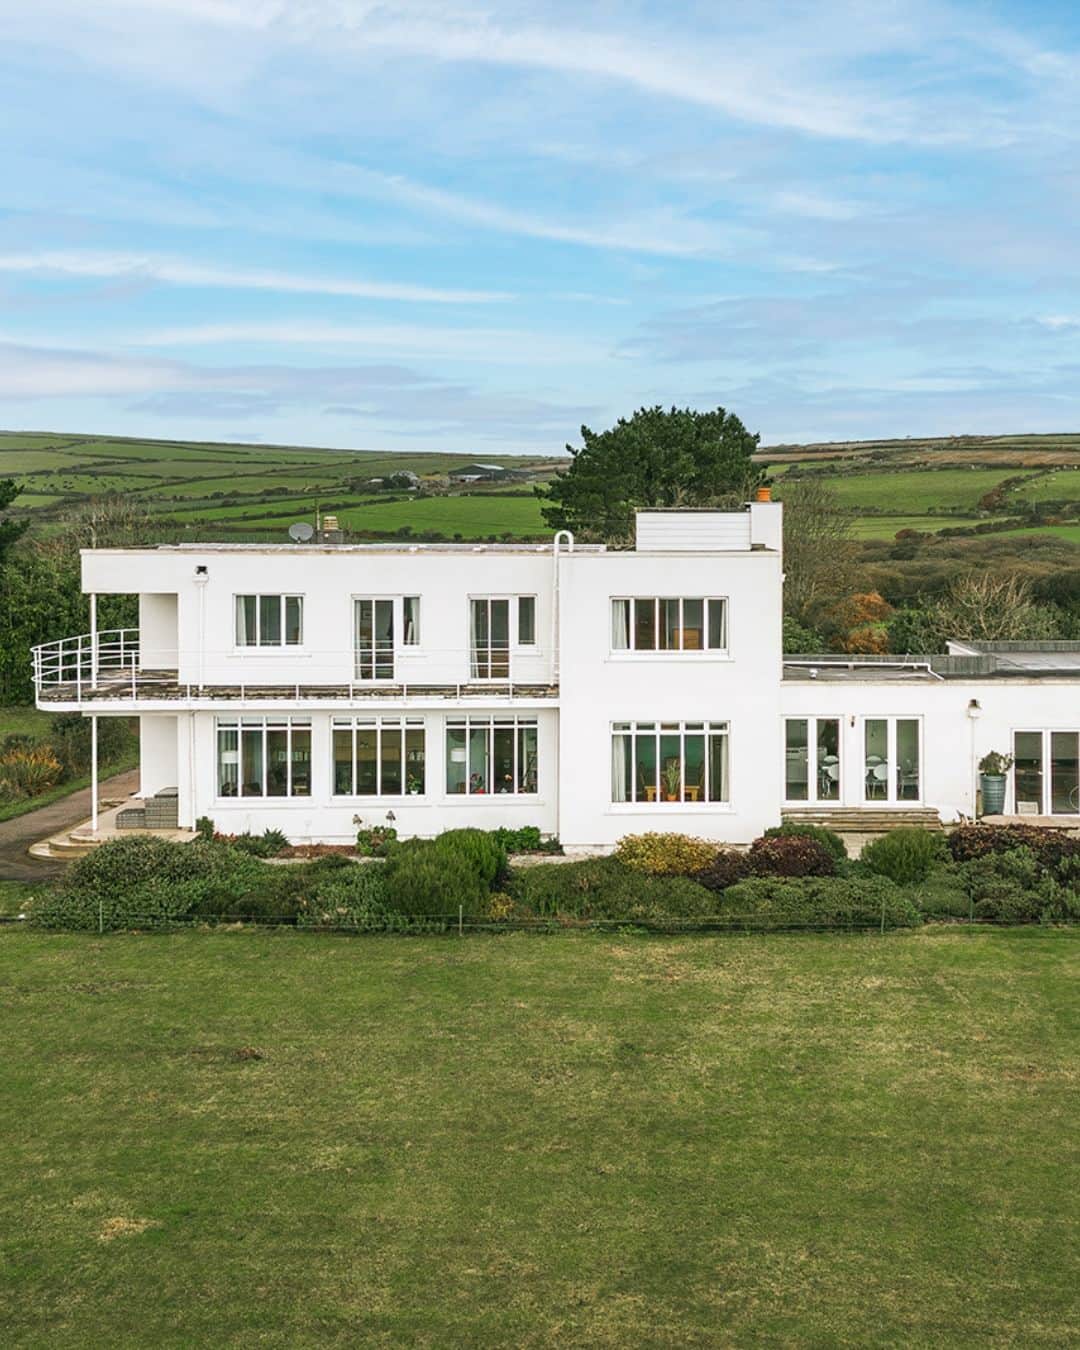 The Modern Houseのインスタグラム：「#forsale Modern Movement: a beautifully laid out 1930s home in Penzance, designed by architect Geoffrey Bazeley.  Follow the link in bio for the sales listing.  Tregannick, Penzance, Cornwall」